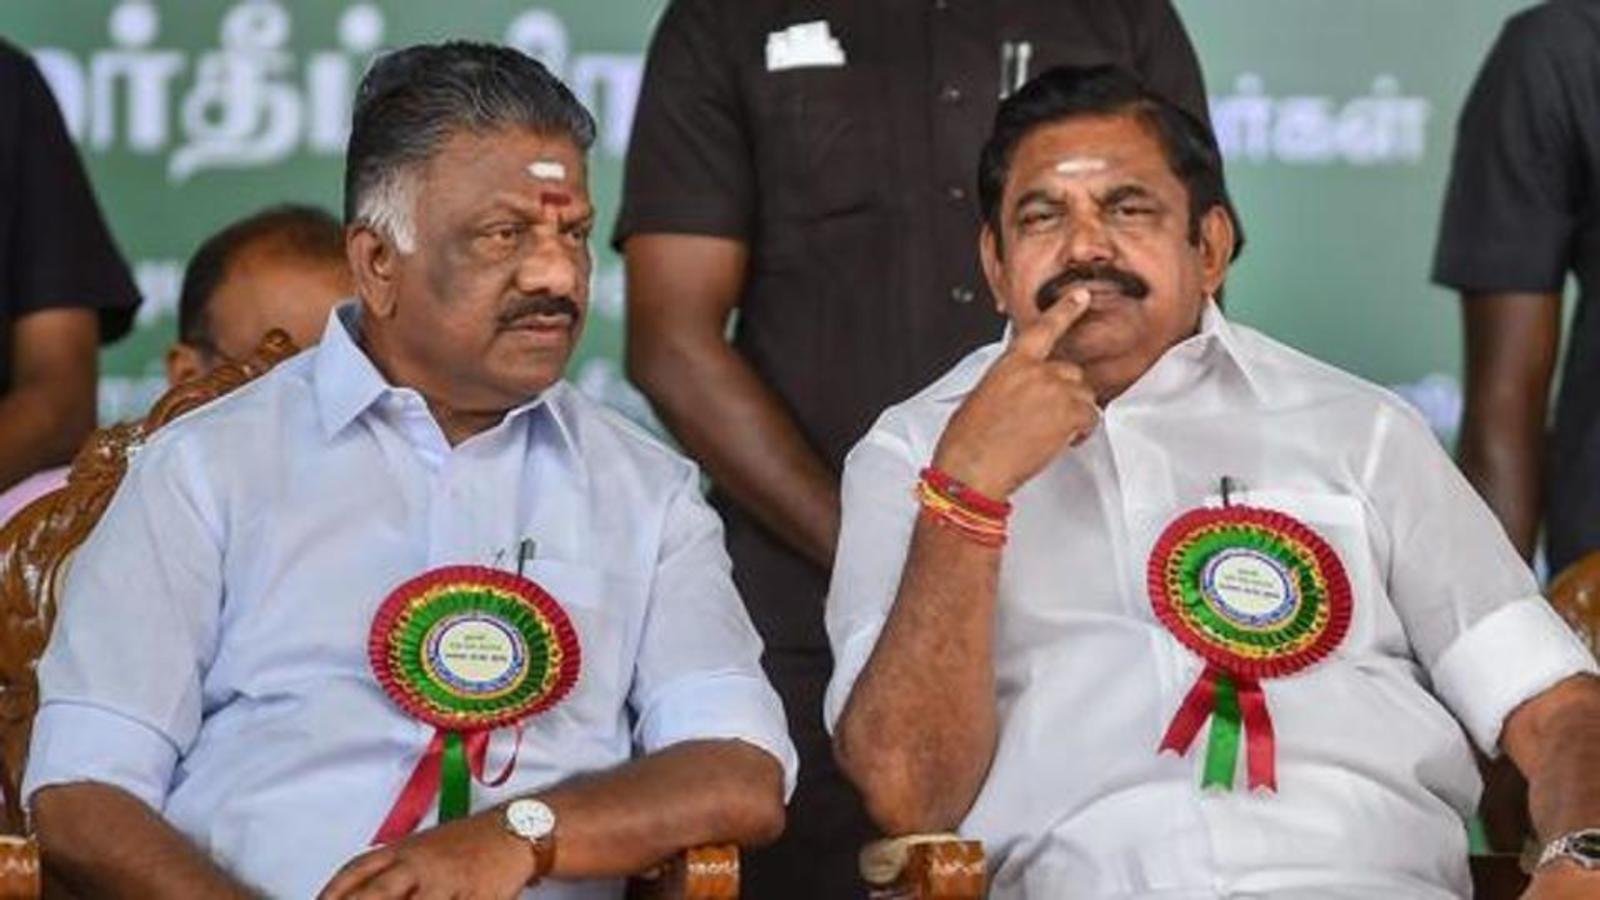 With Panneerselvam's photo, Palaniswami camp's polite counter to poster  warning | Latest News India - Hindustan Times